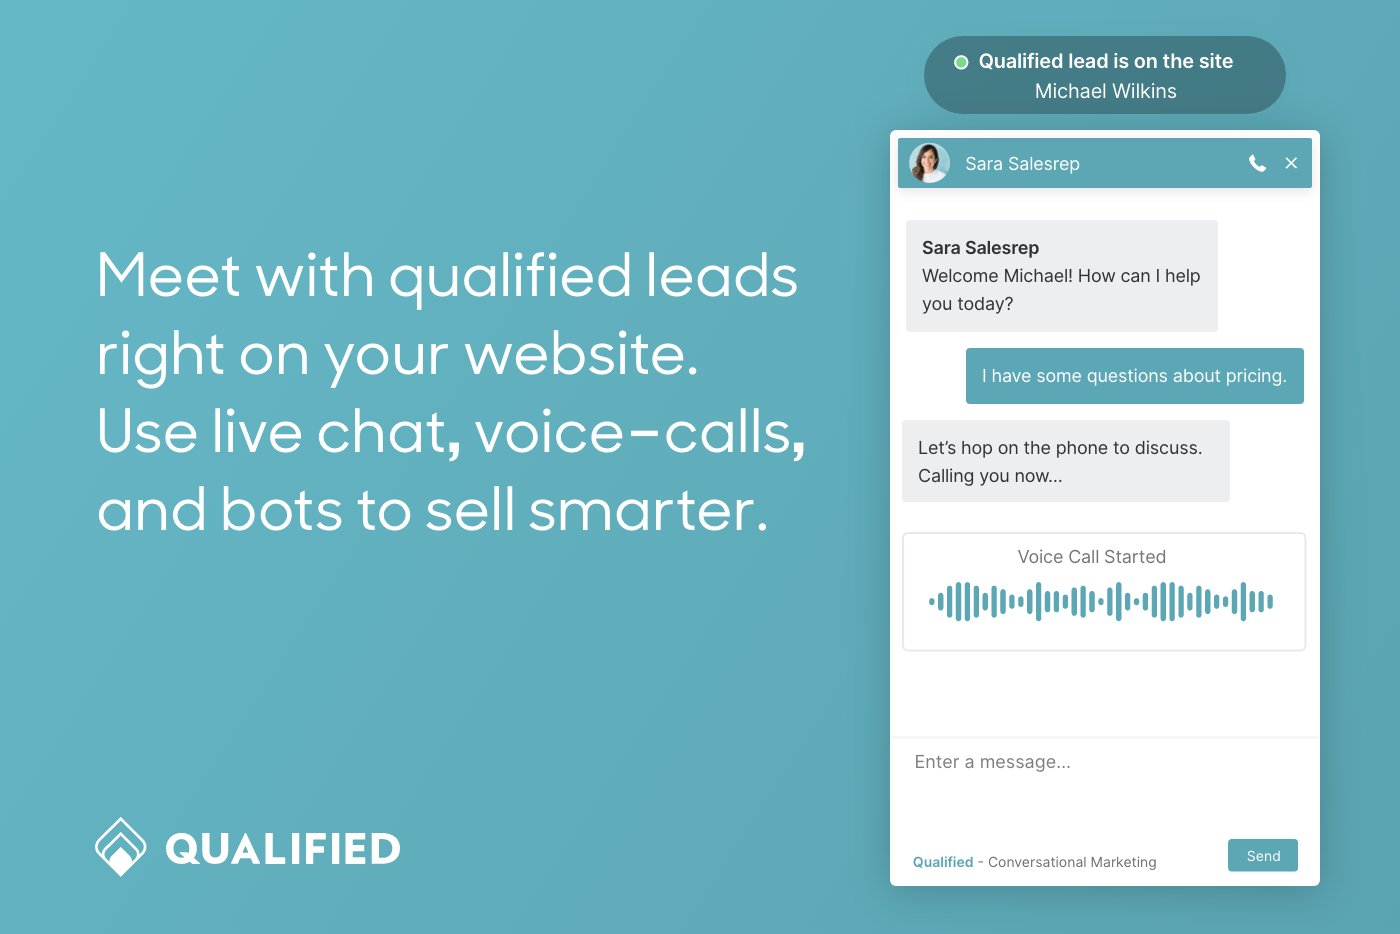 Meet with qualified leads right on your website. Use live chat, voice-calls, and bots to sell smarter.